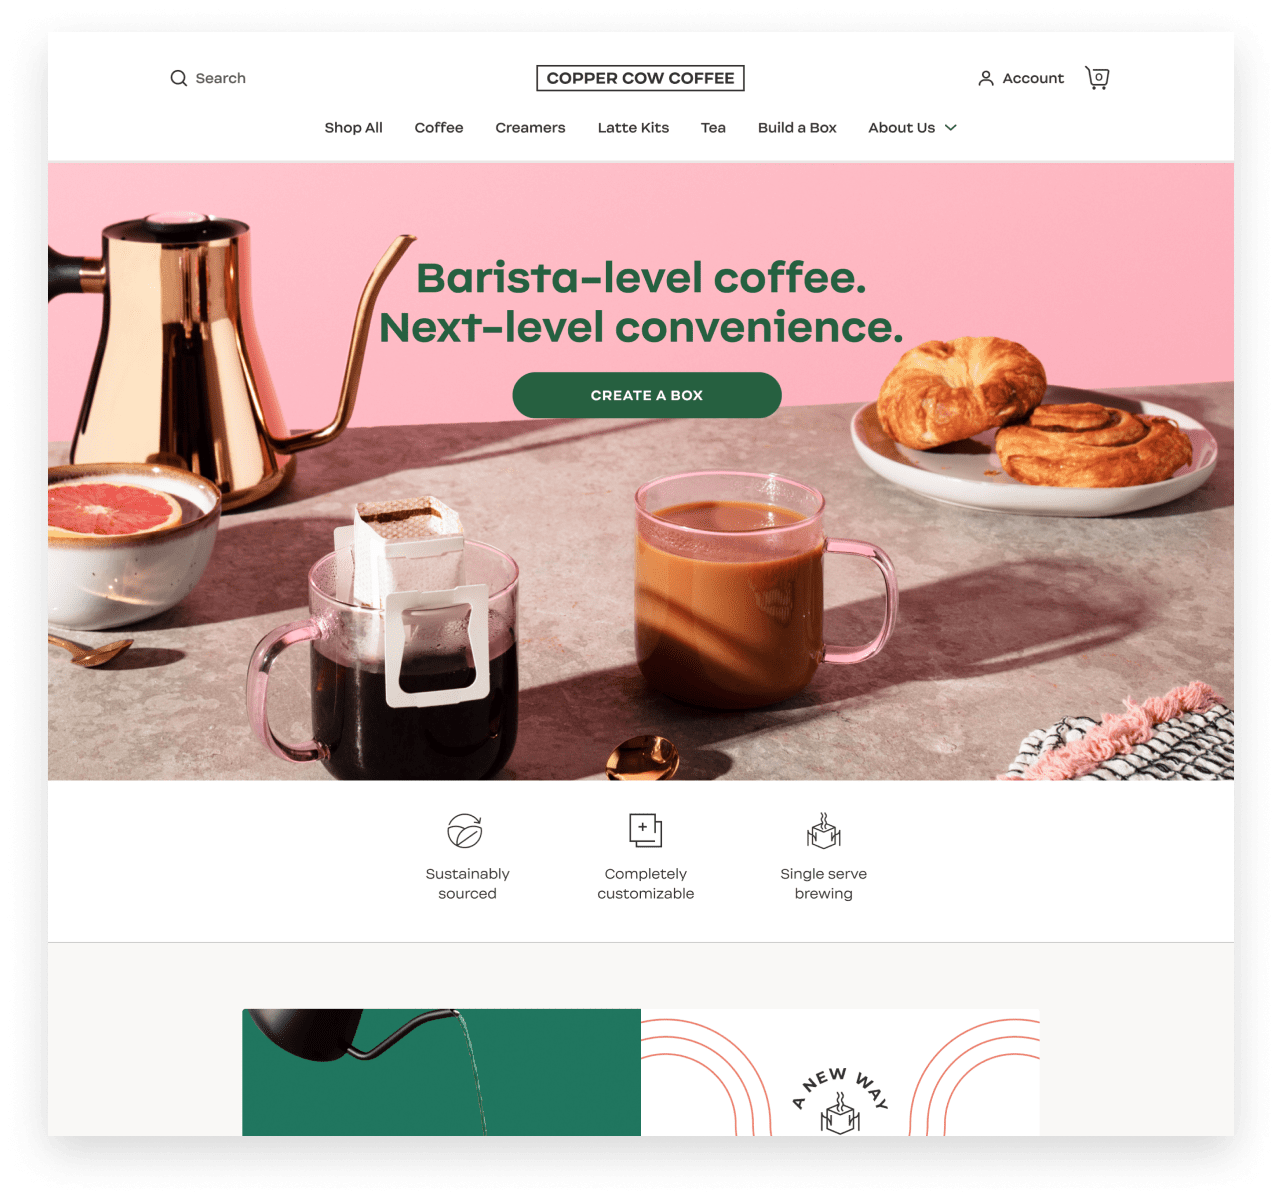 The value proposition and customer benefits are displayed above the fold on the Copper Cow Coffee homepage.